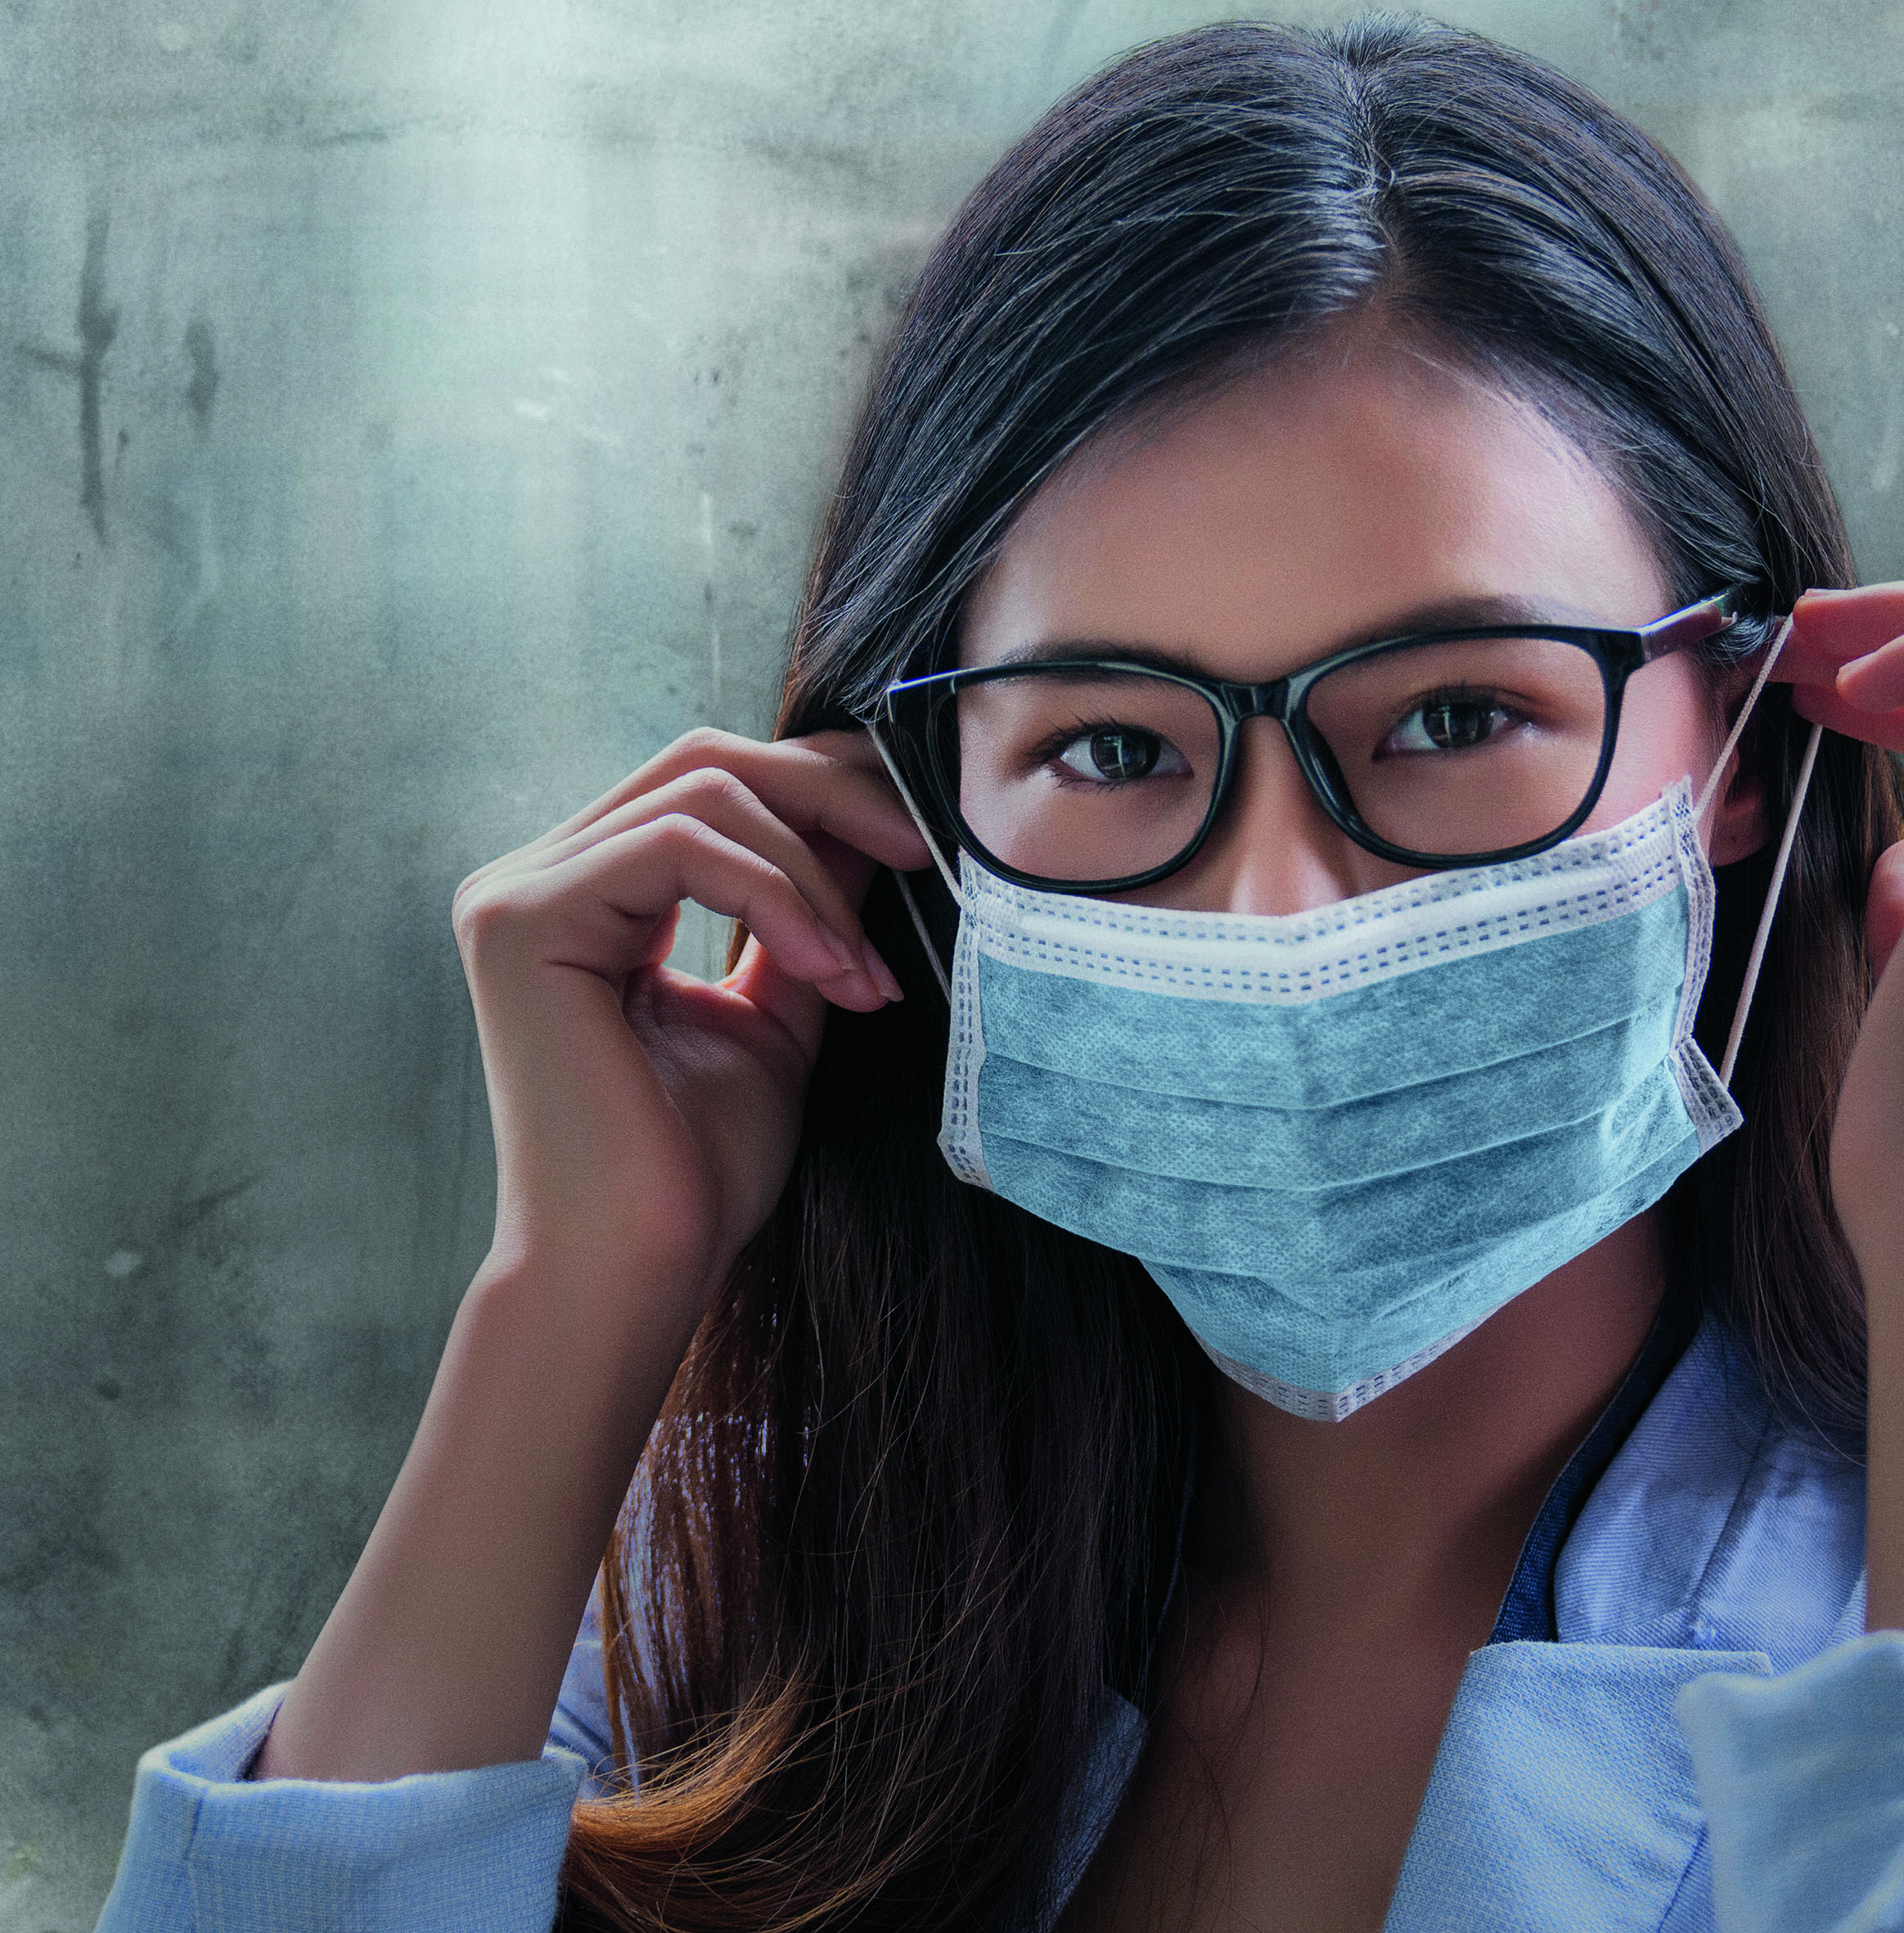 How to stop your glasses from fogging up when wearing a mask